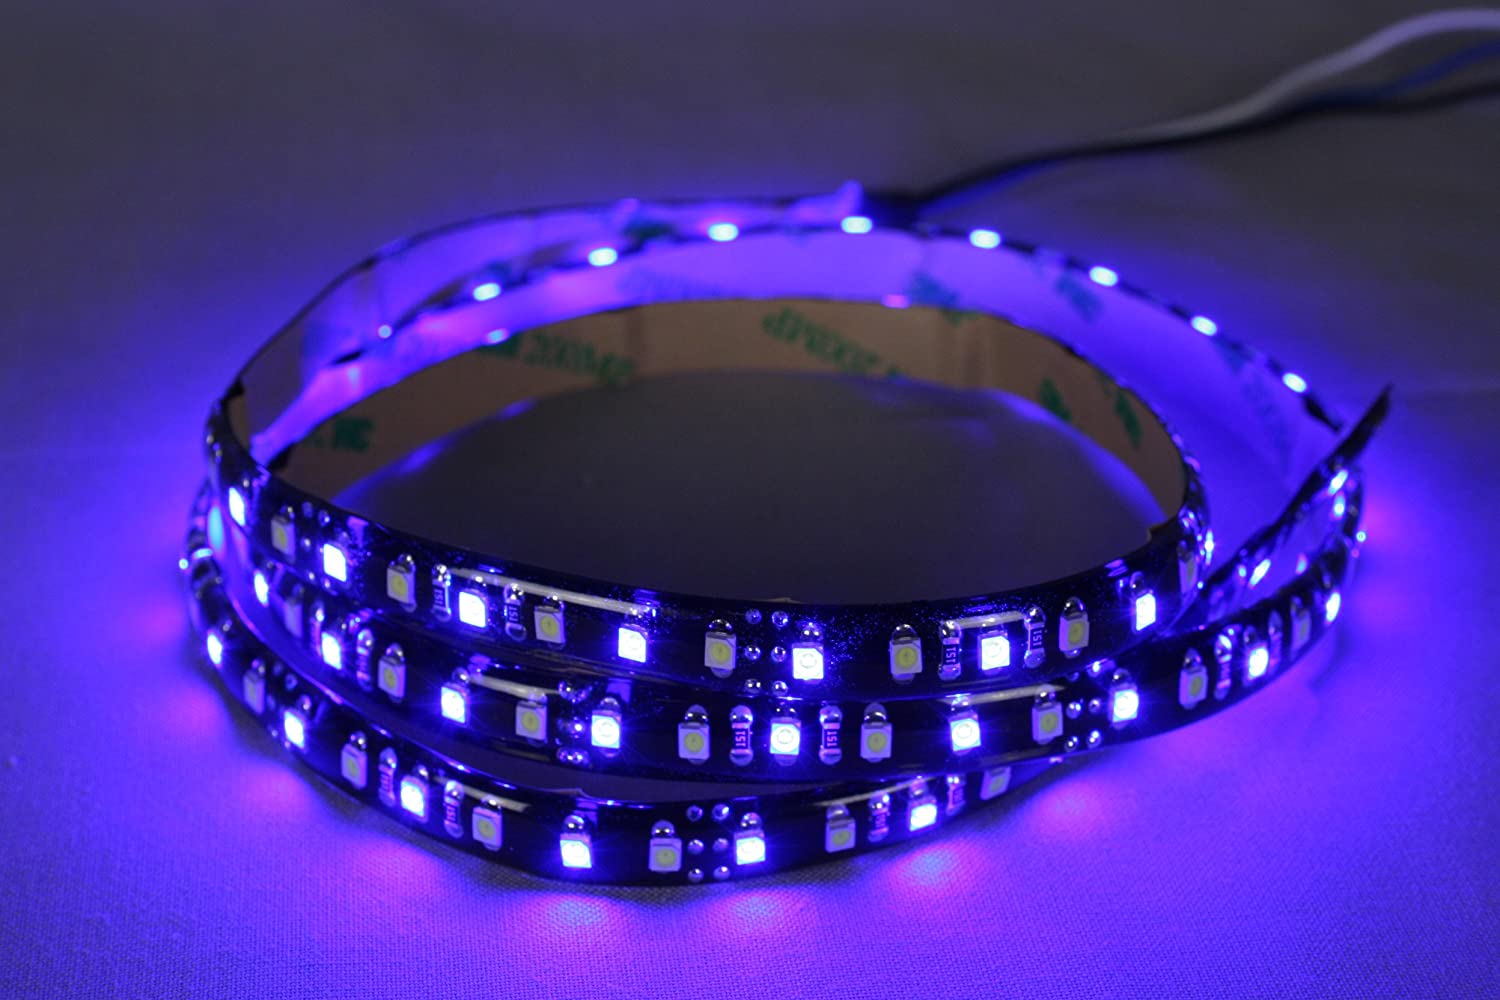 LED Light Strip - Dual Color (Blue/White) LED Light Strips for Auto Airplane Aircraft Rv Boat Interior Cabin Cockpit LED Lighting